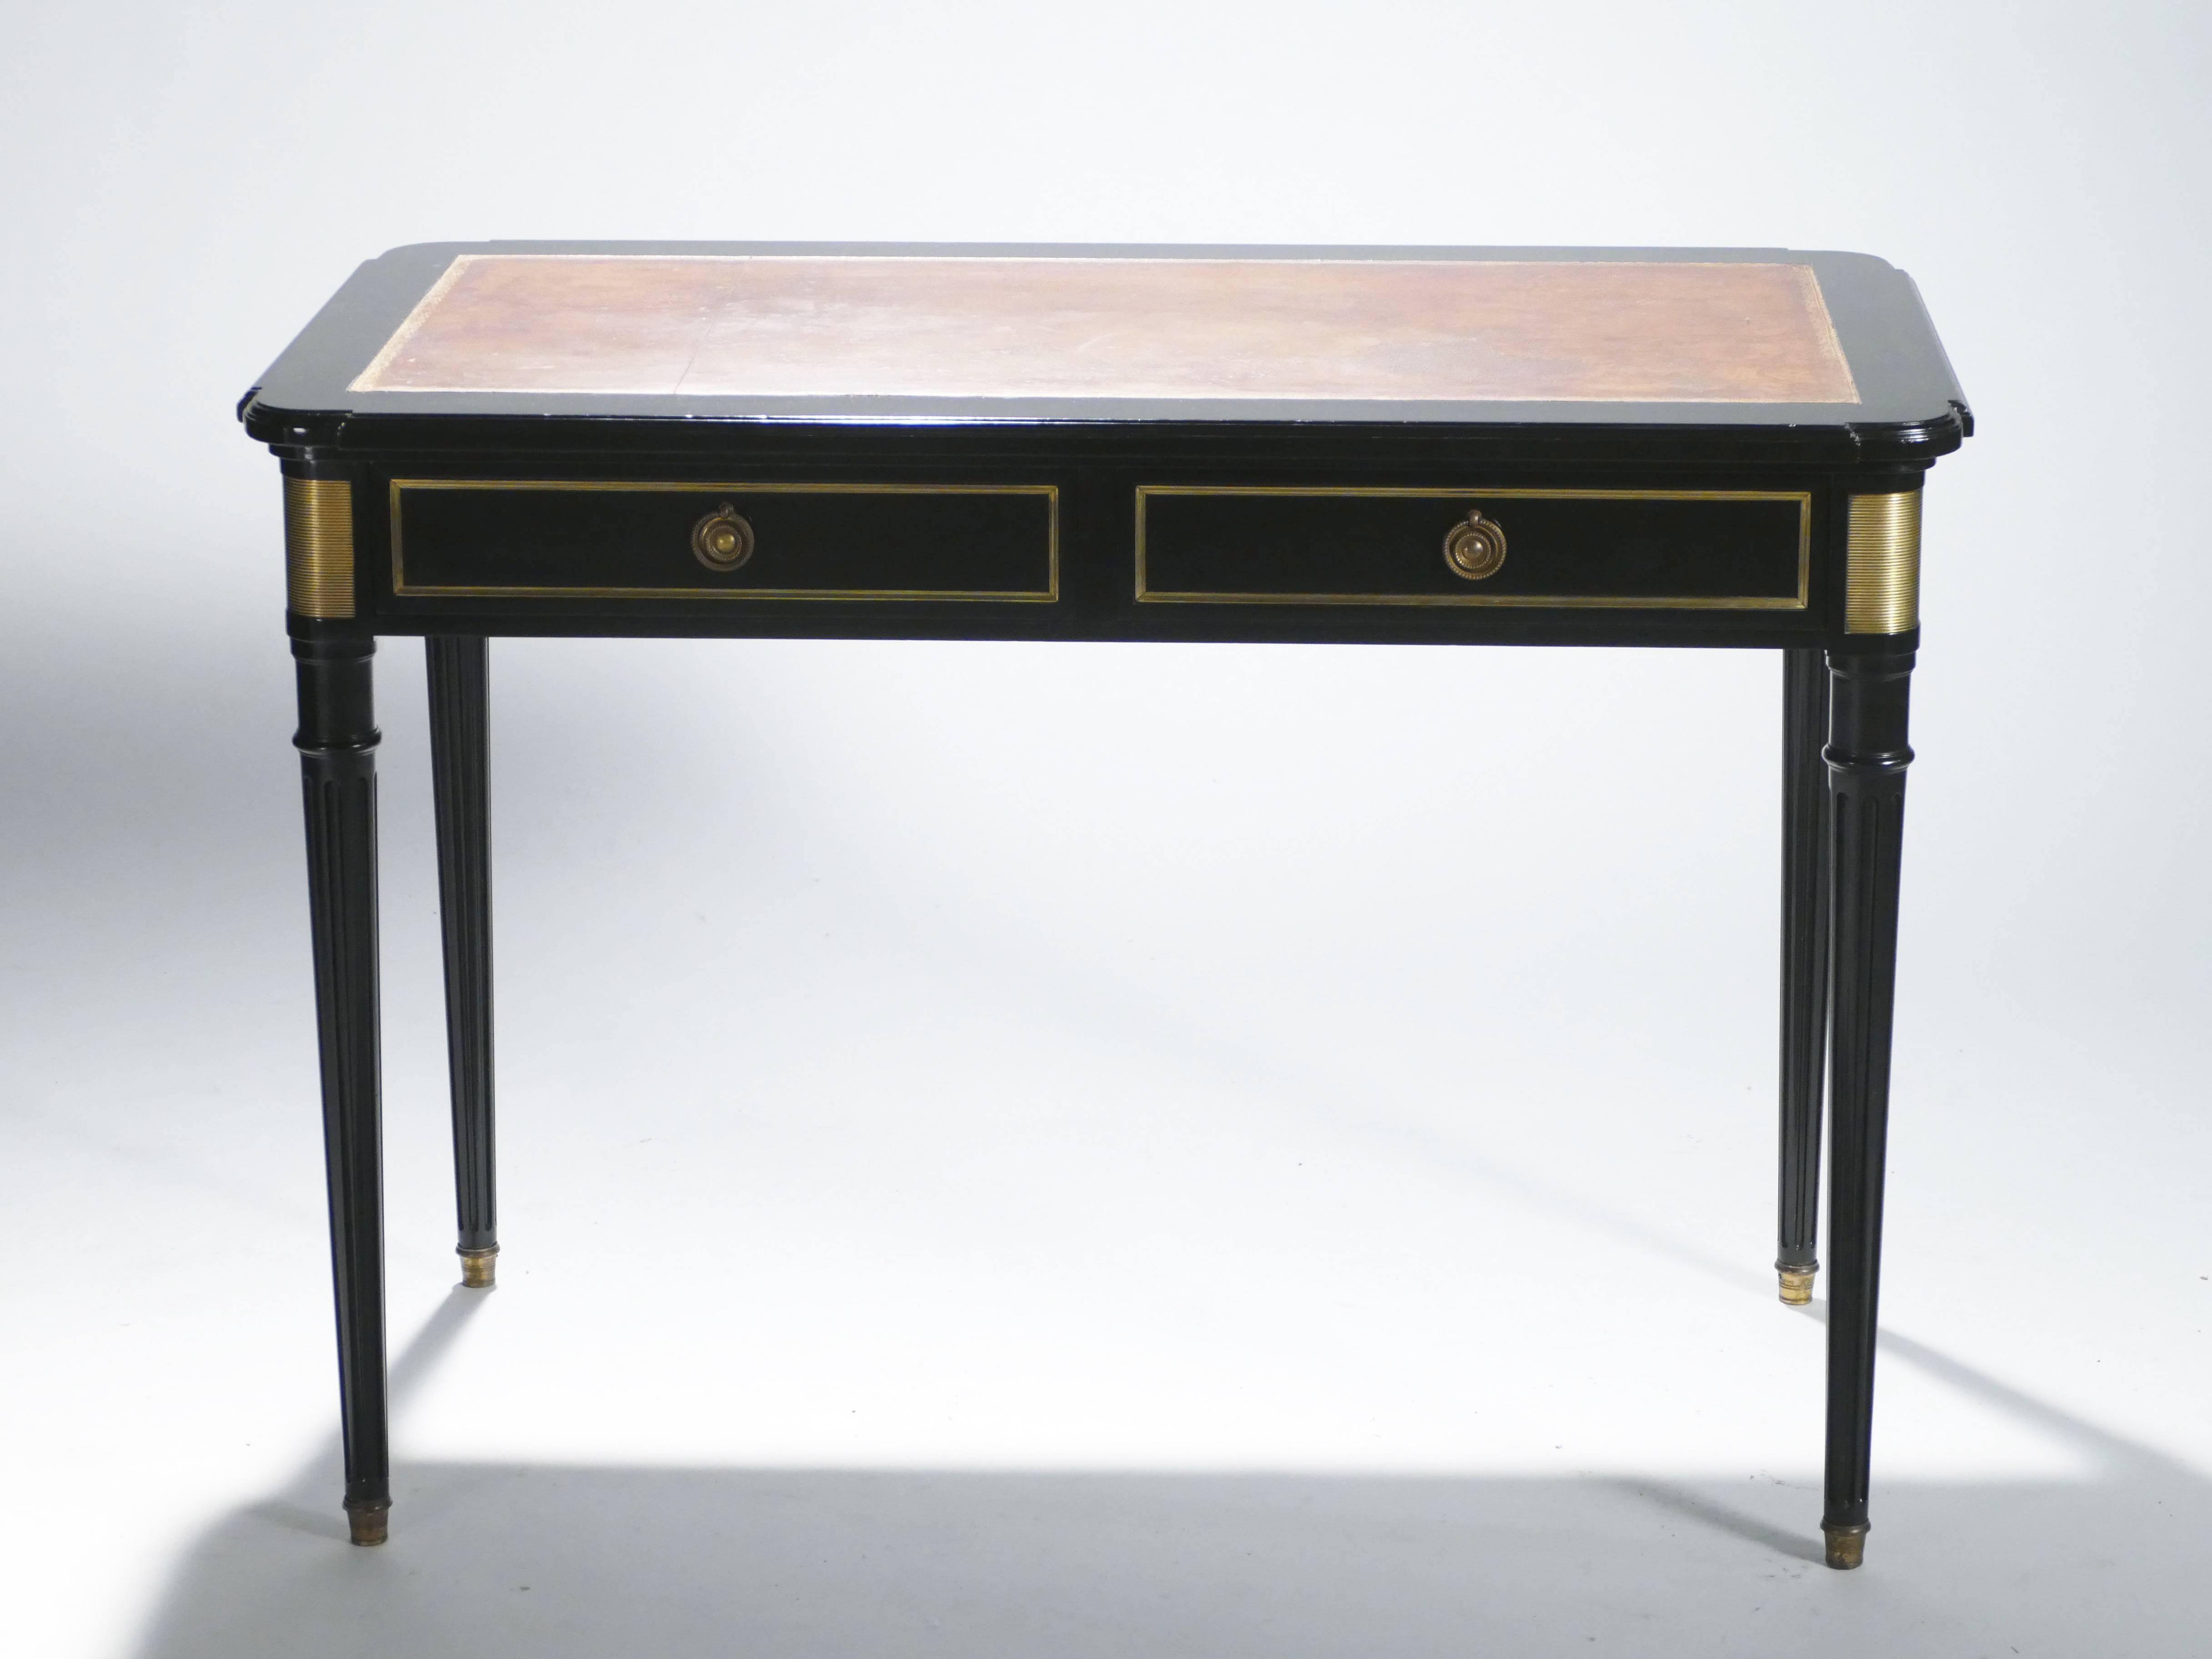 This attractive writing desk is signed by French designer Maurice Hirsch. With its sleek rectangular shape and fluted feet, this piece is typical of the designer’s neoclassical work. Beautiful re-varnished ebony wood forms the substantial parts of